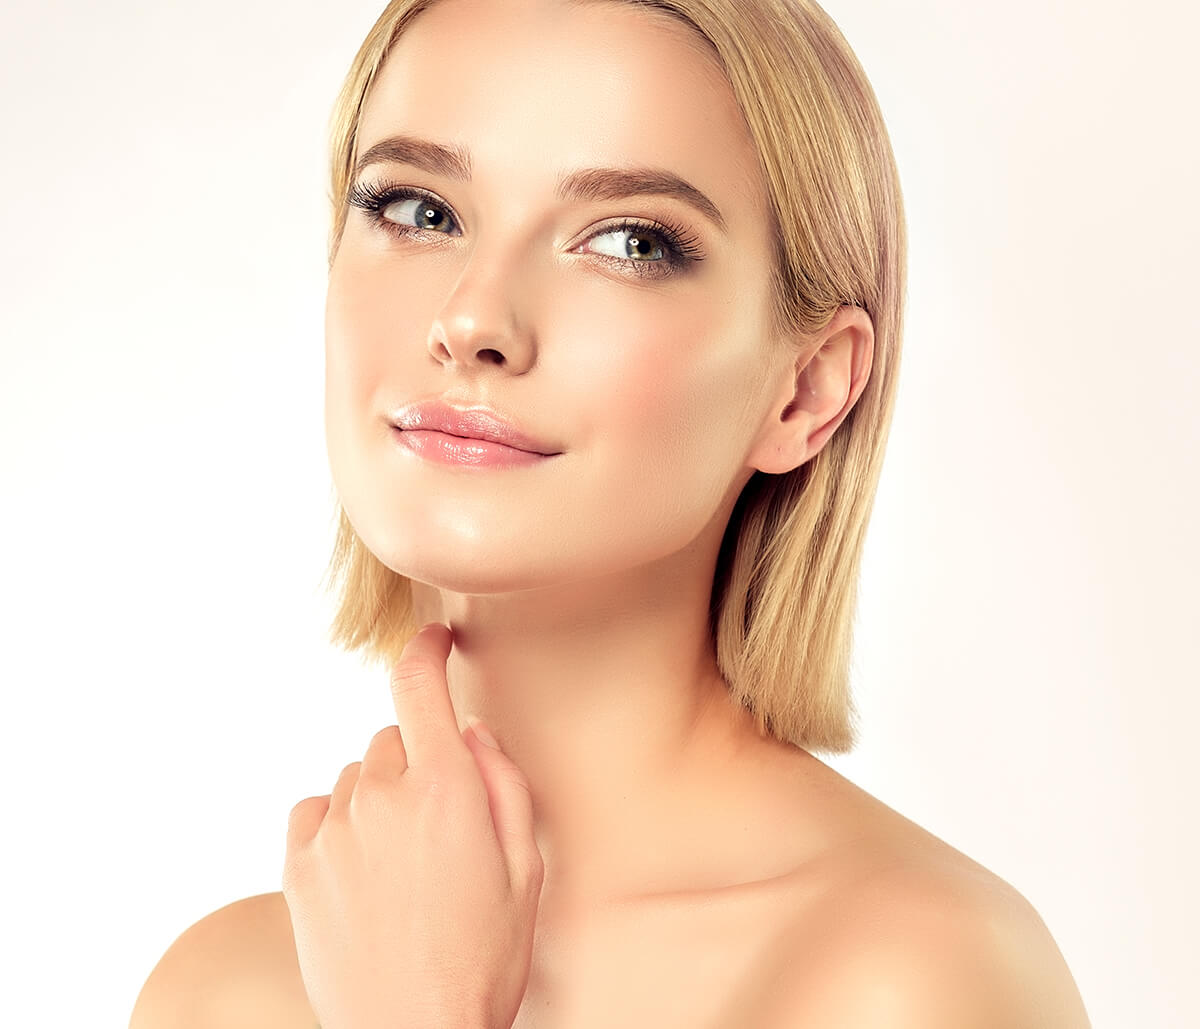 Facial Fillers in New York City Area